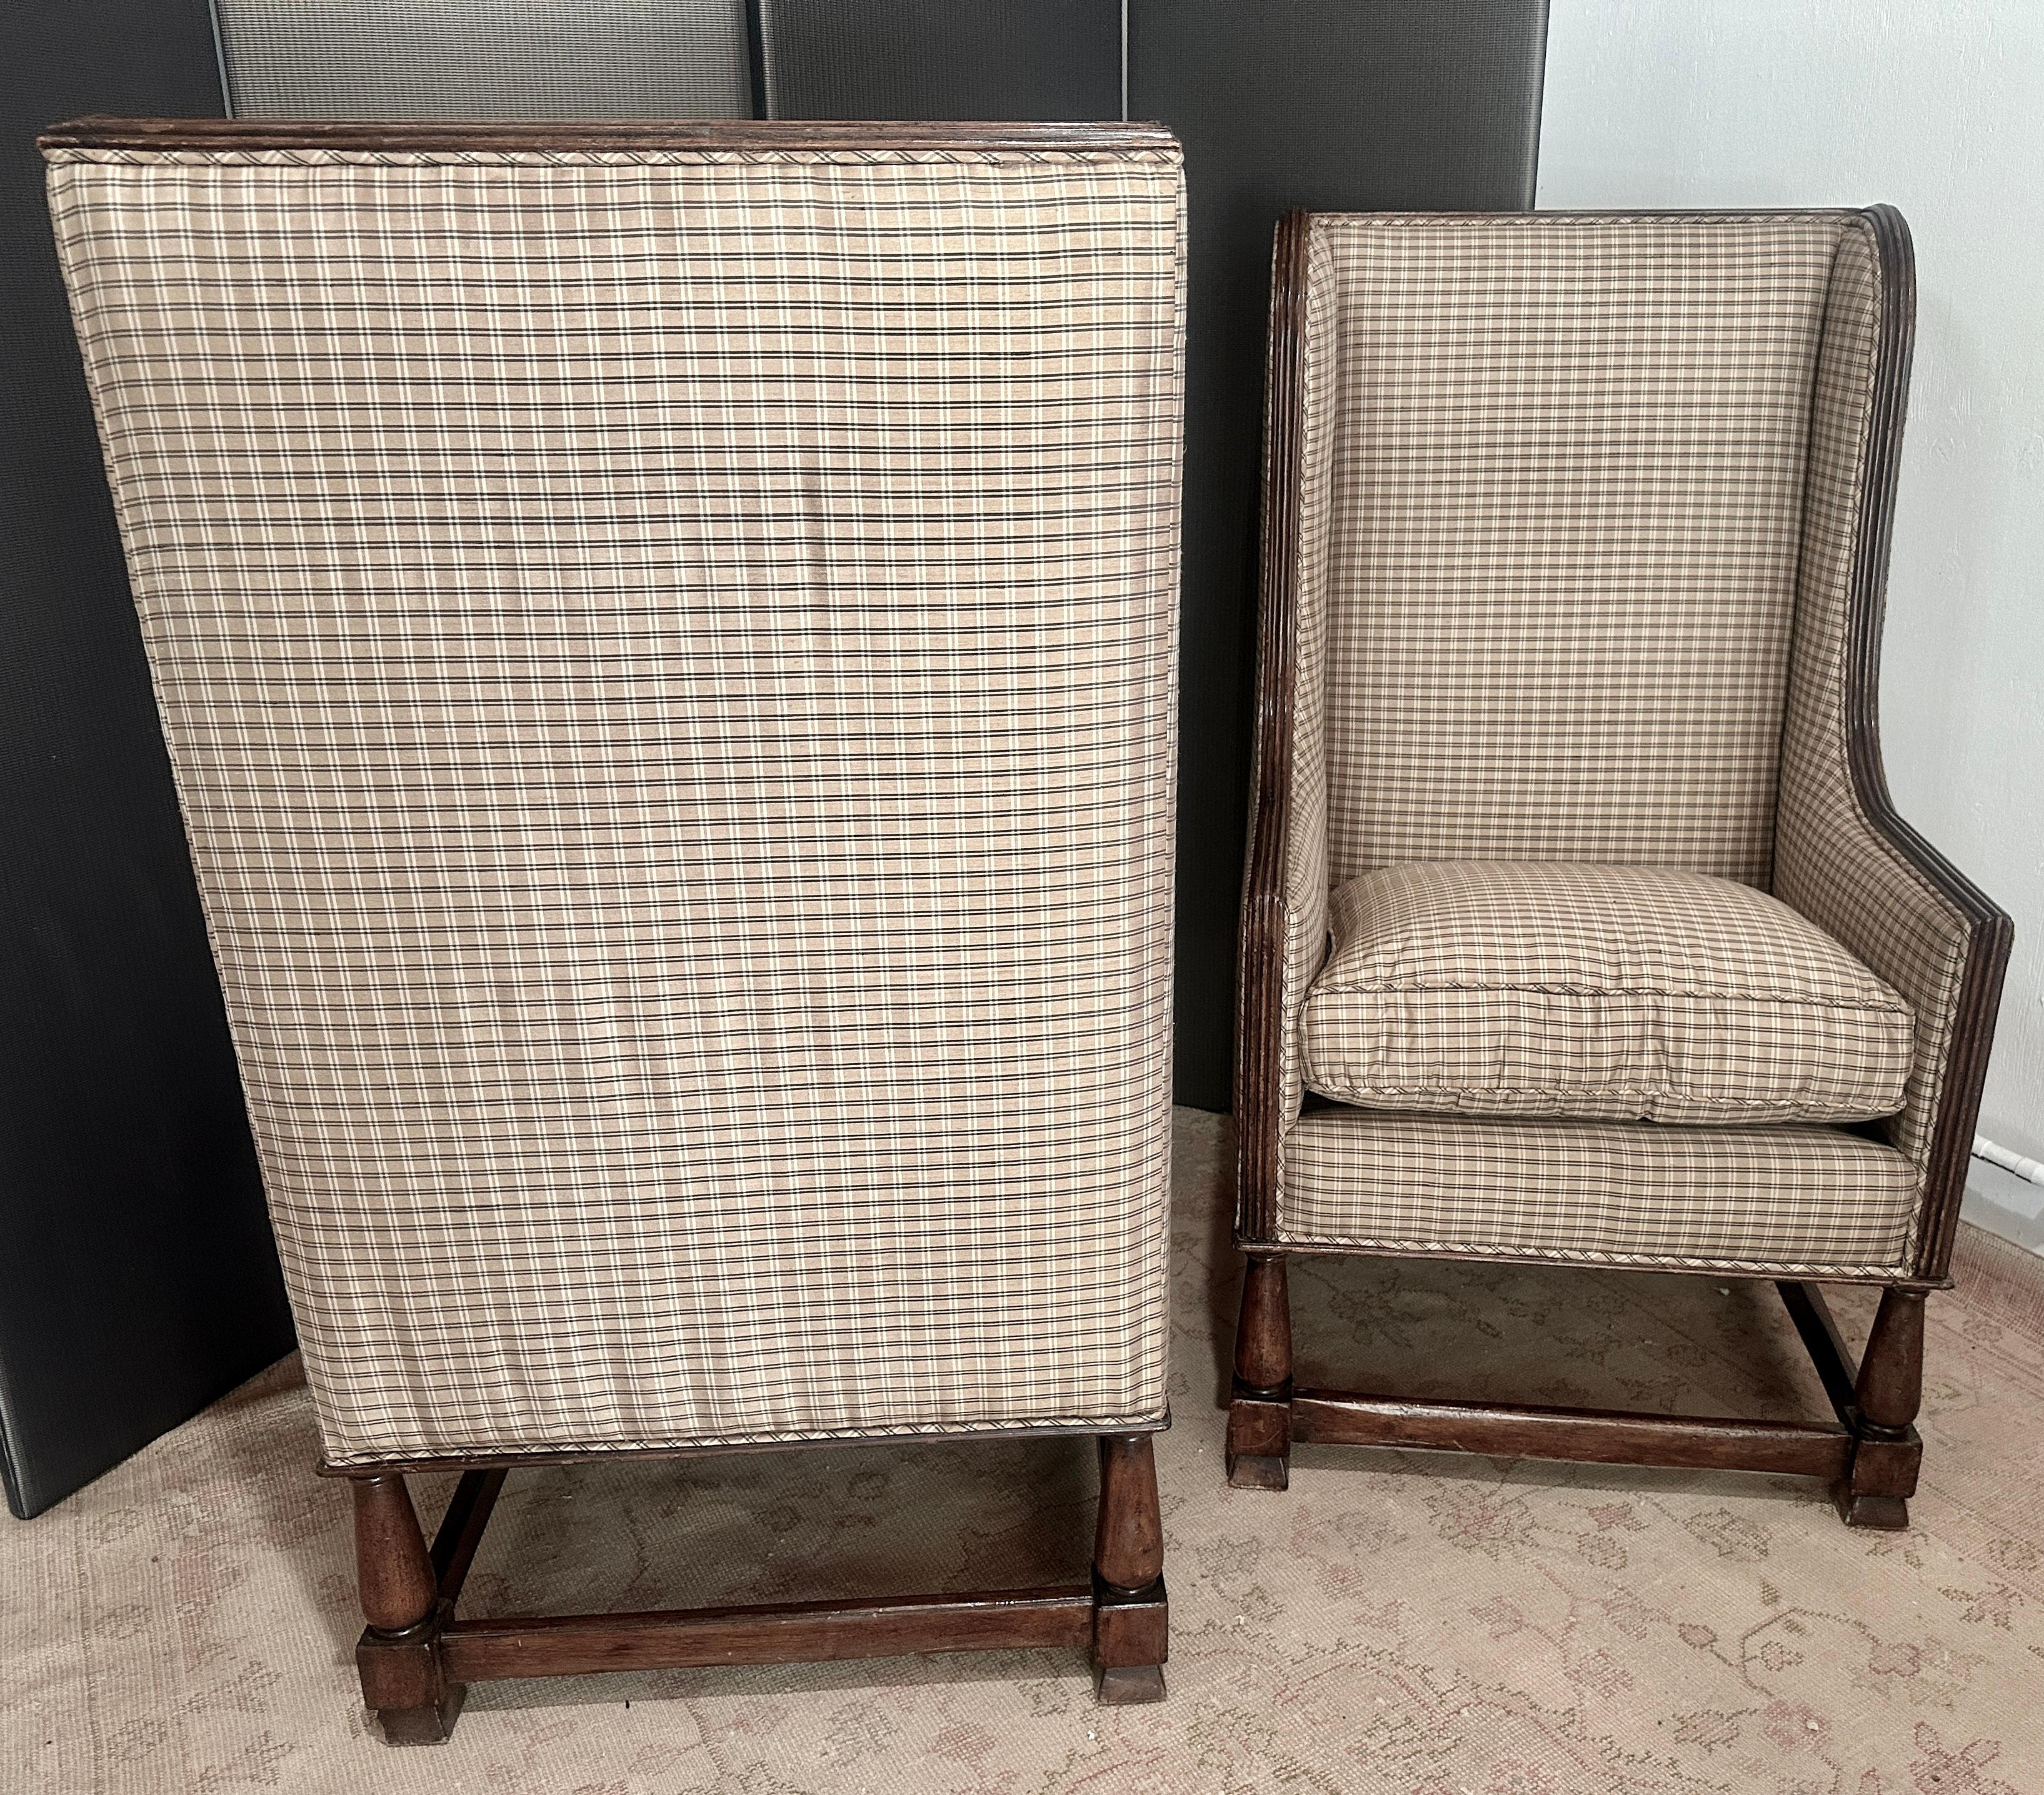  Italian Lounge Chairs in Walnut -a pair - newly upholstered in Silk Plaid For Sale 2